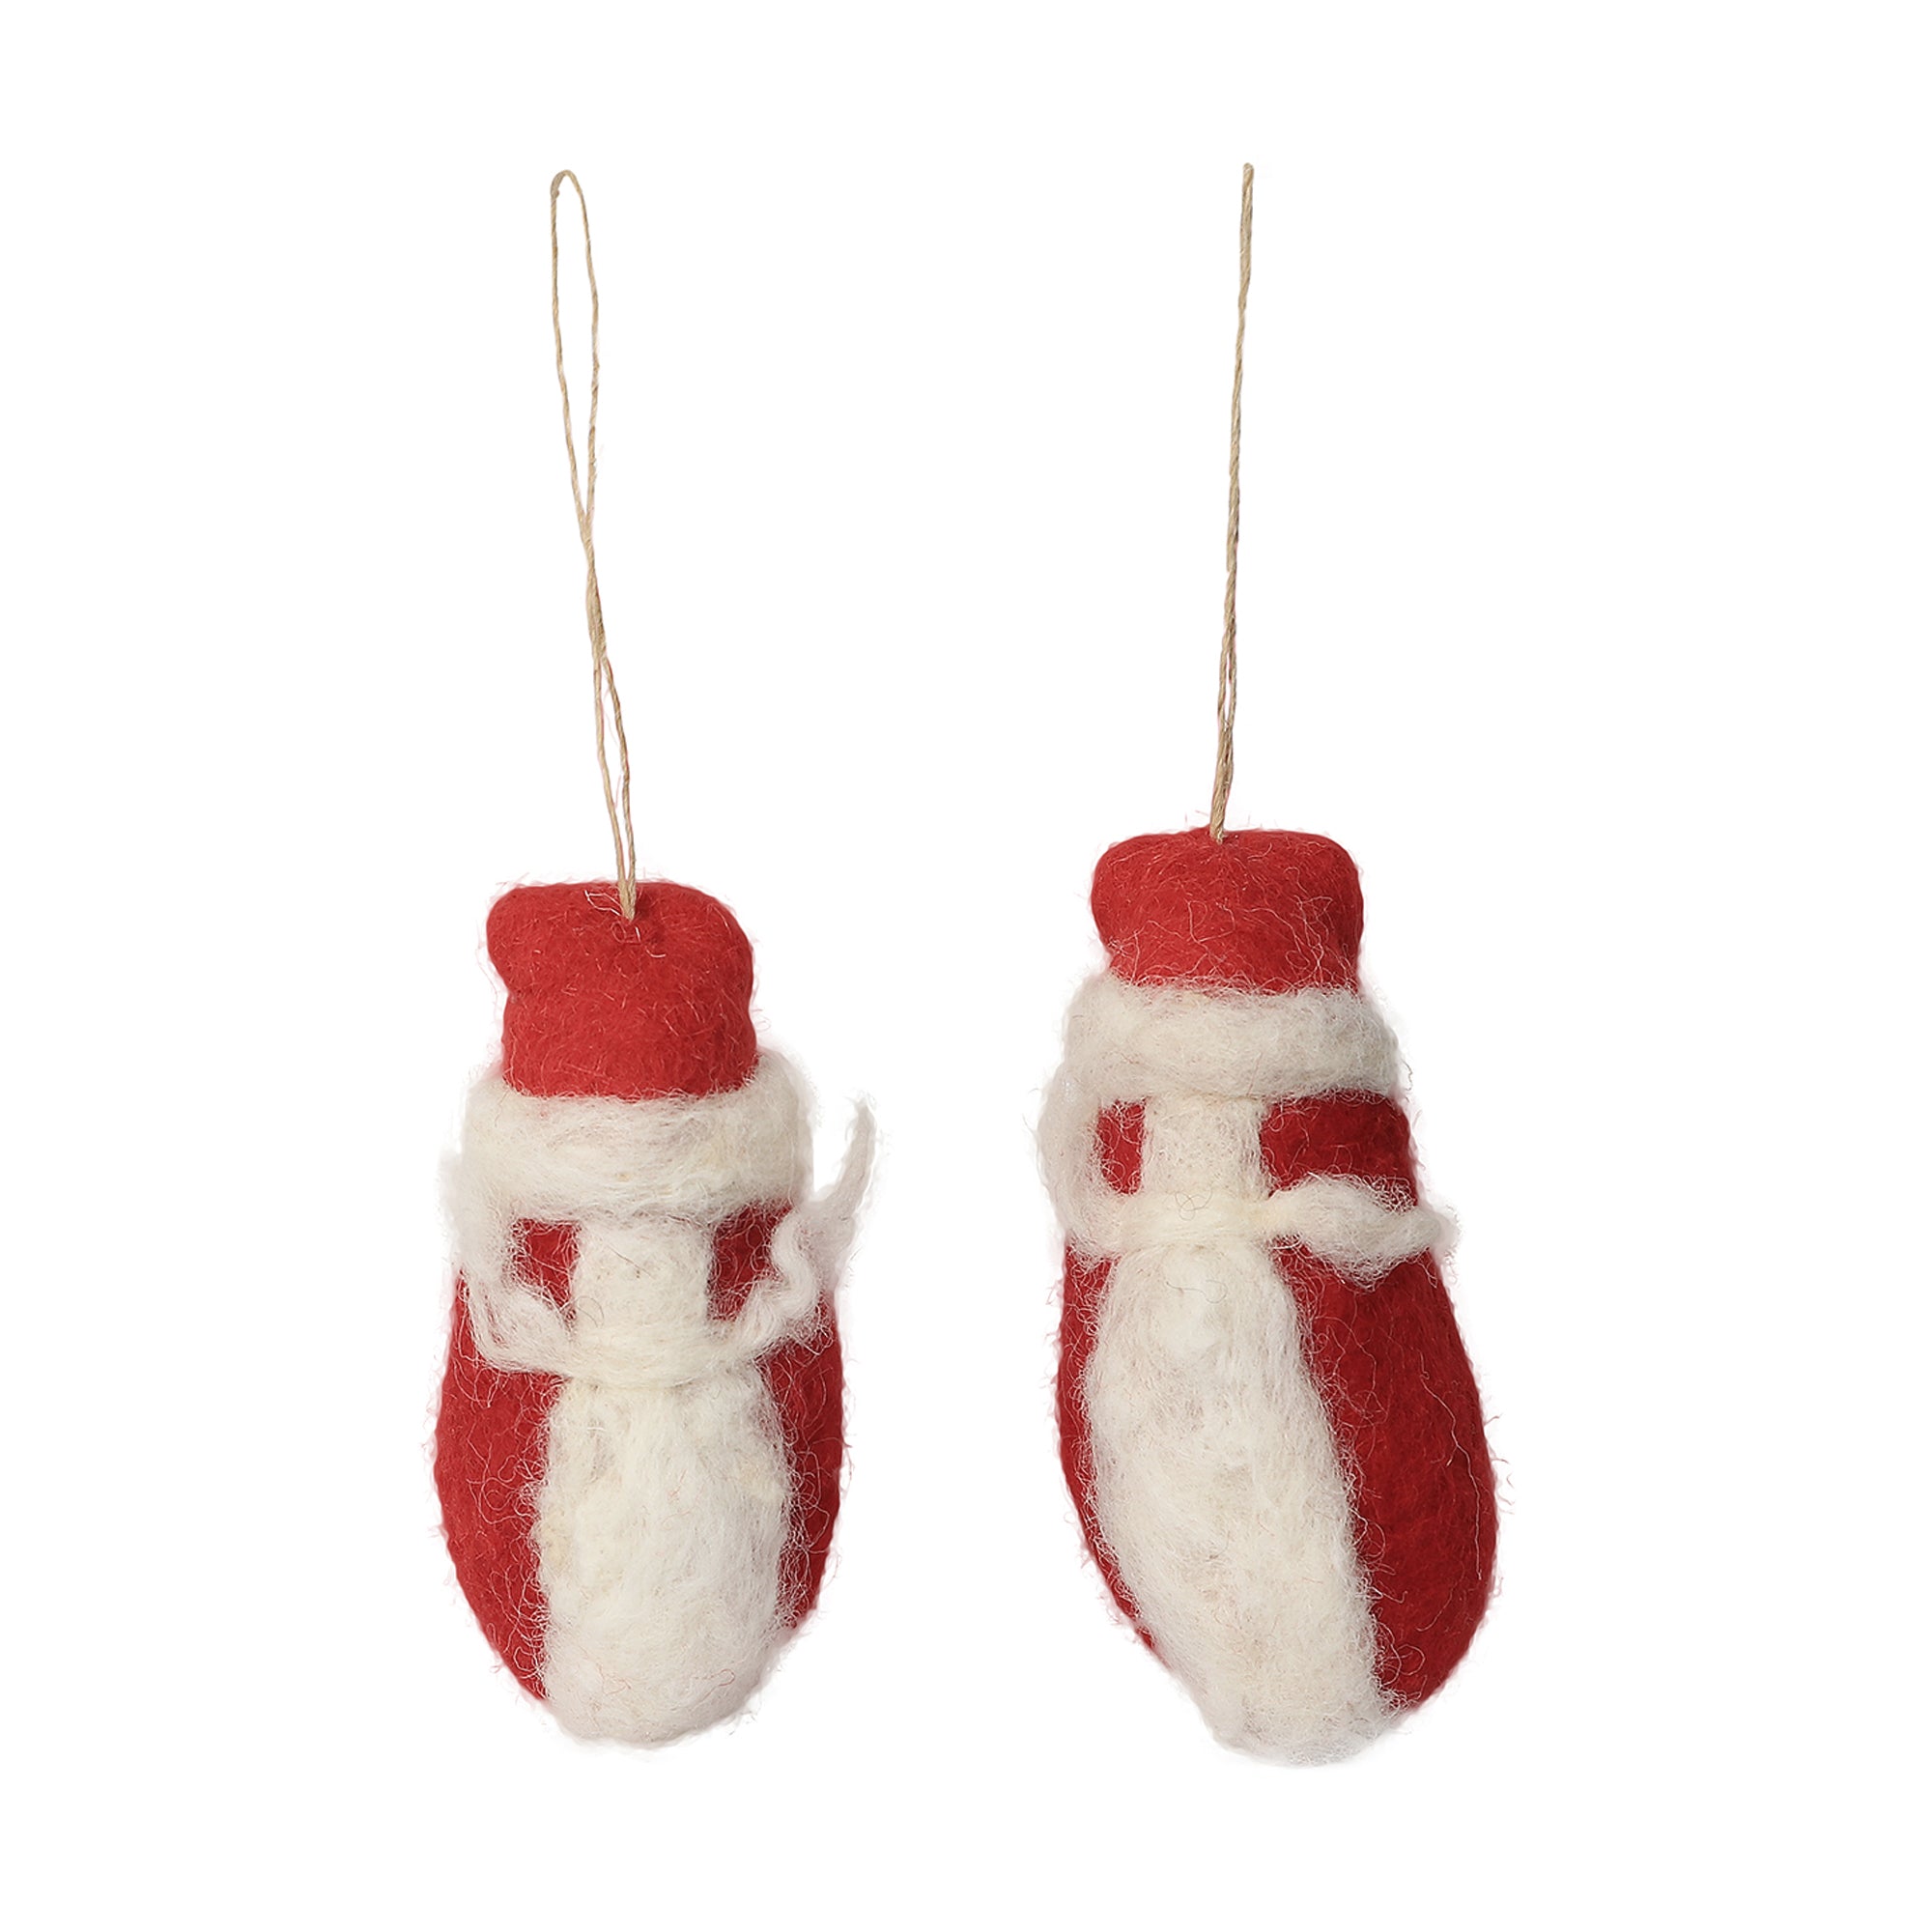 Santa With Beard And Moustache (Set Of 2)